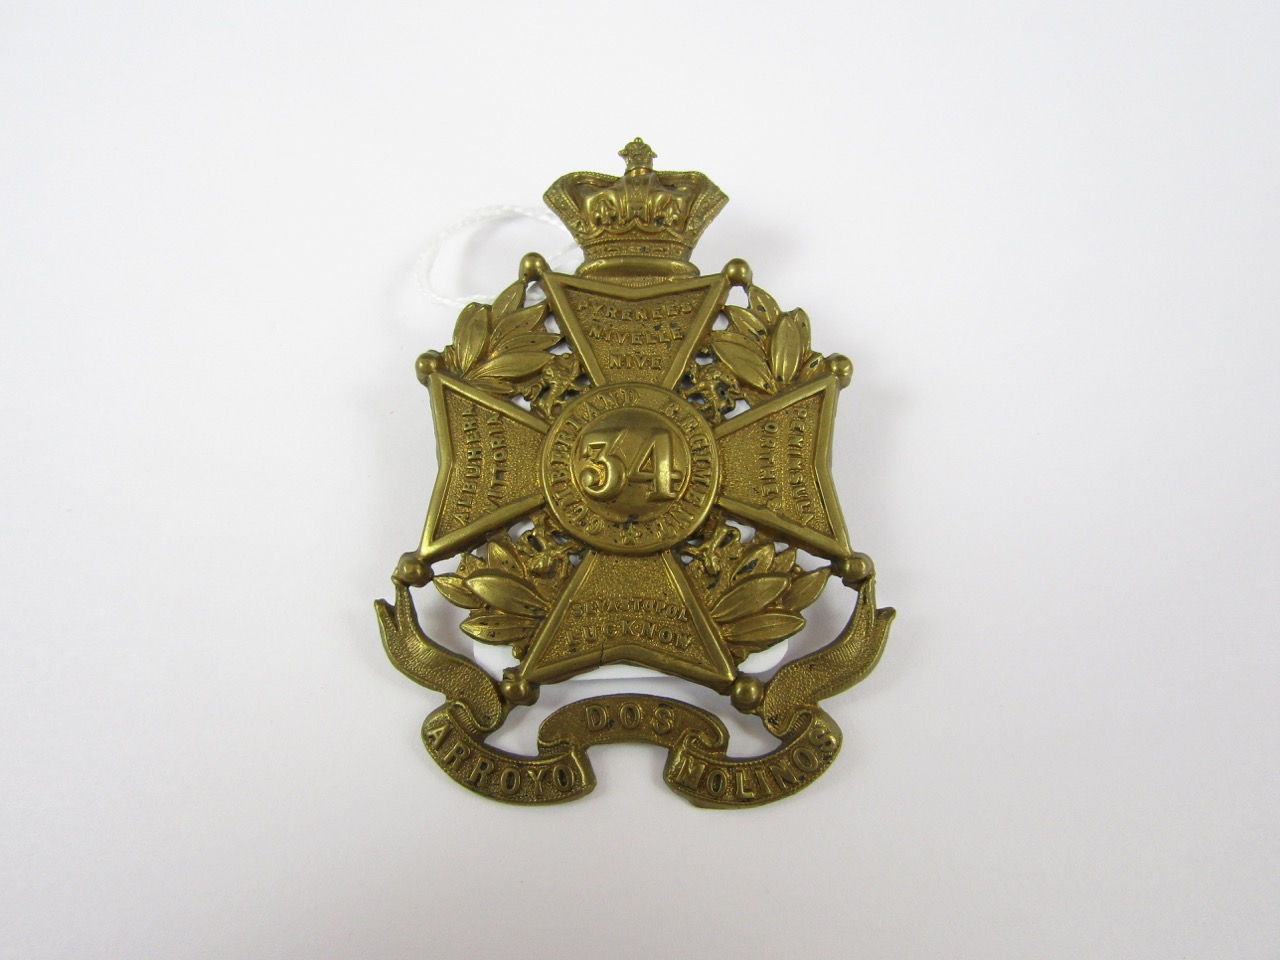 A 34th of Foot second pattern glengarry badge